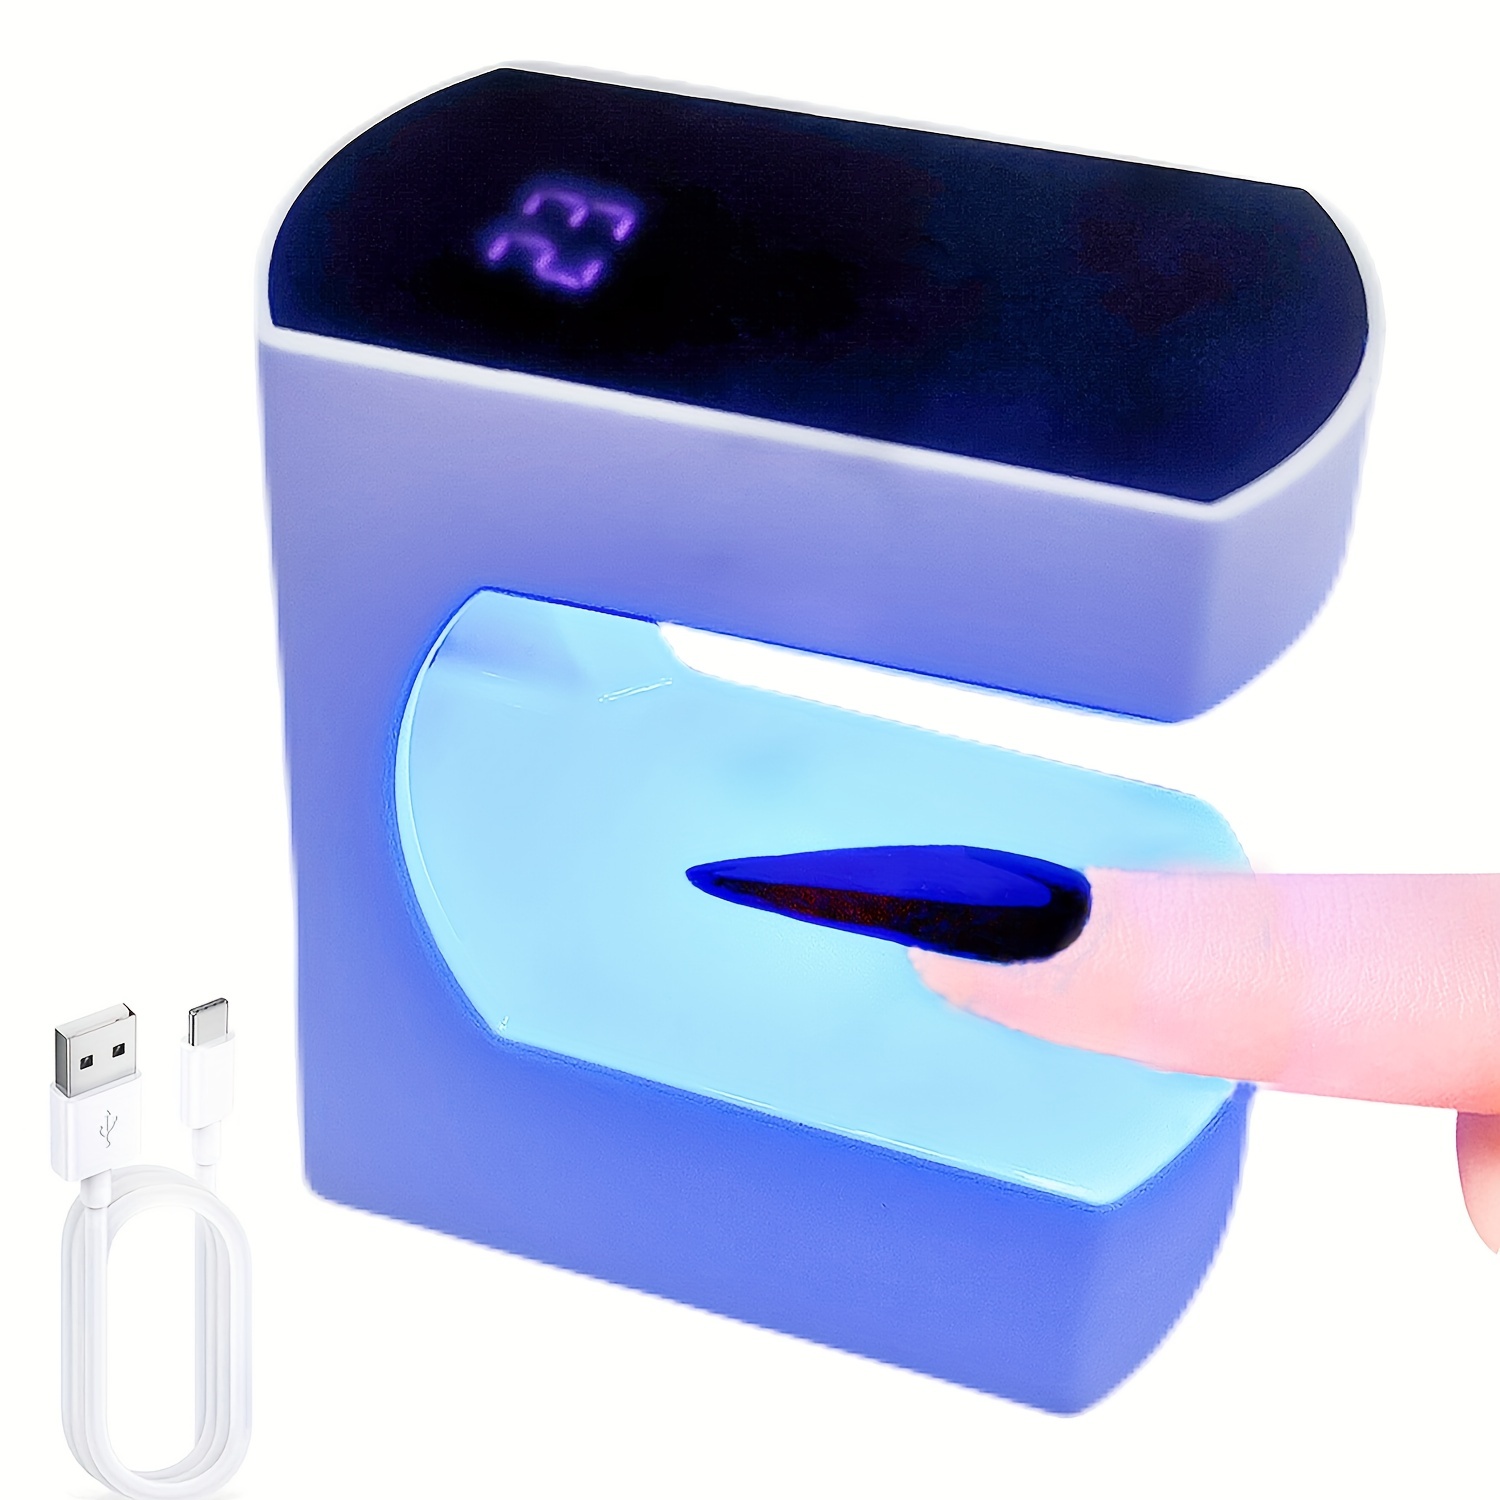 

Mini Led Nail Lamp, 24w Uv Light For Nails With Timer Uv Lamp For Gel Nails Quicky-dry Nail Light Portable Usb Nail Dryer For Travel Manicure Tool Nail Art Tool